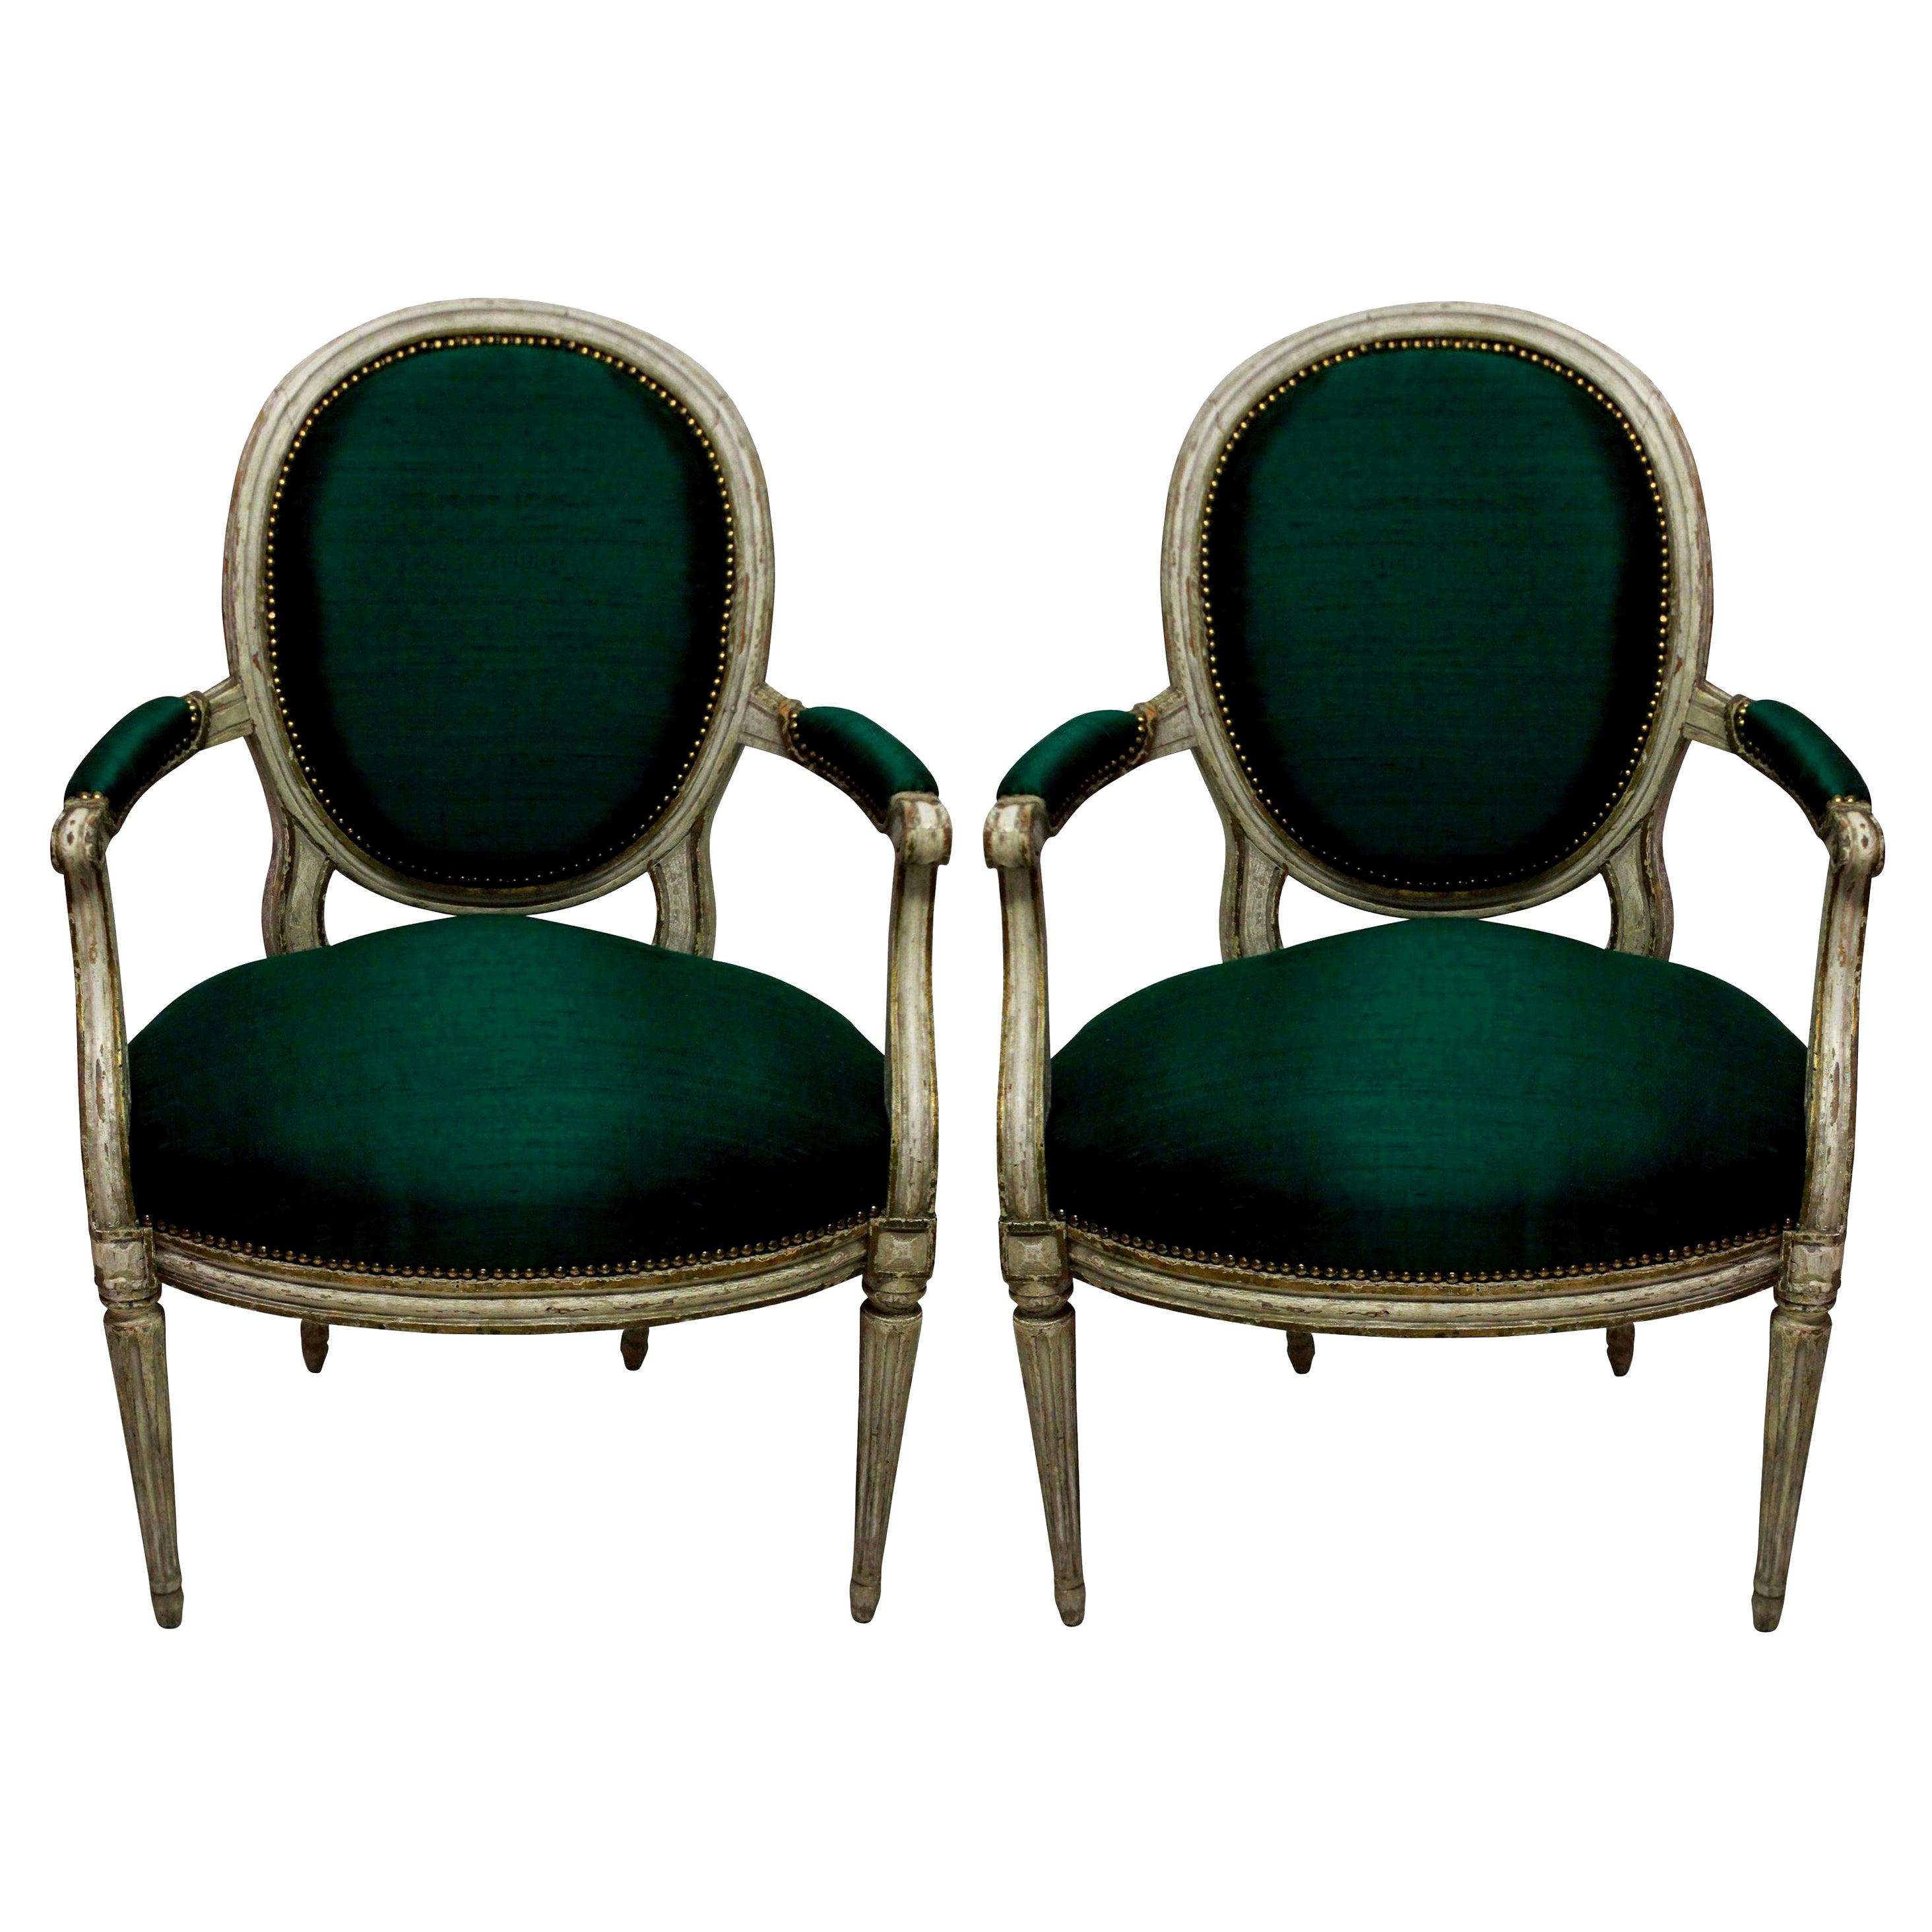 Pair of French 18th Century Armchairs in Emerald Silk